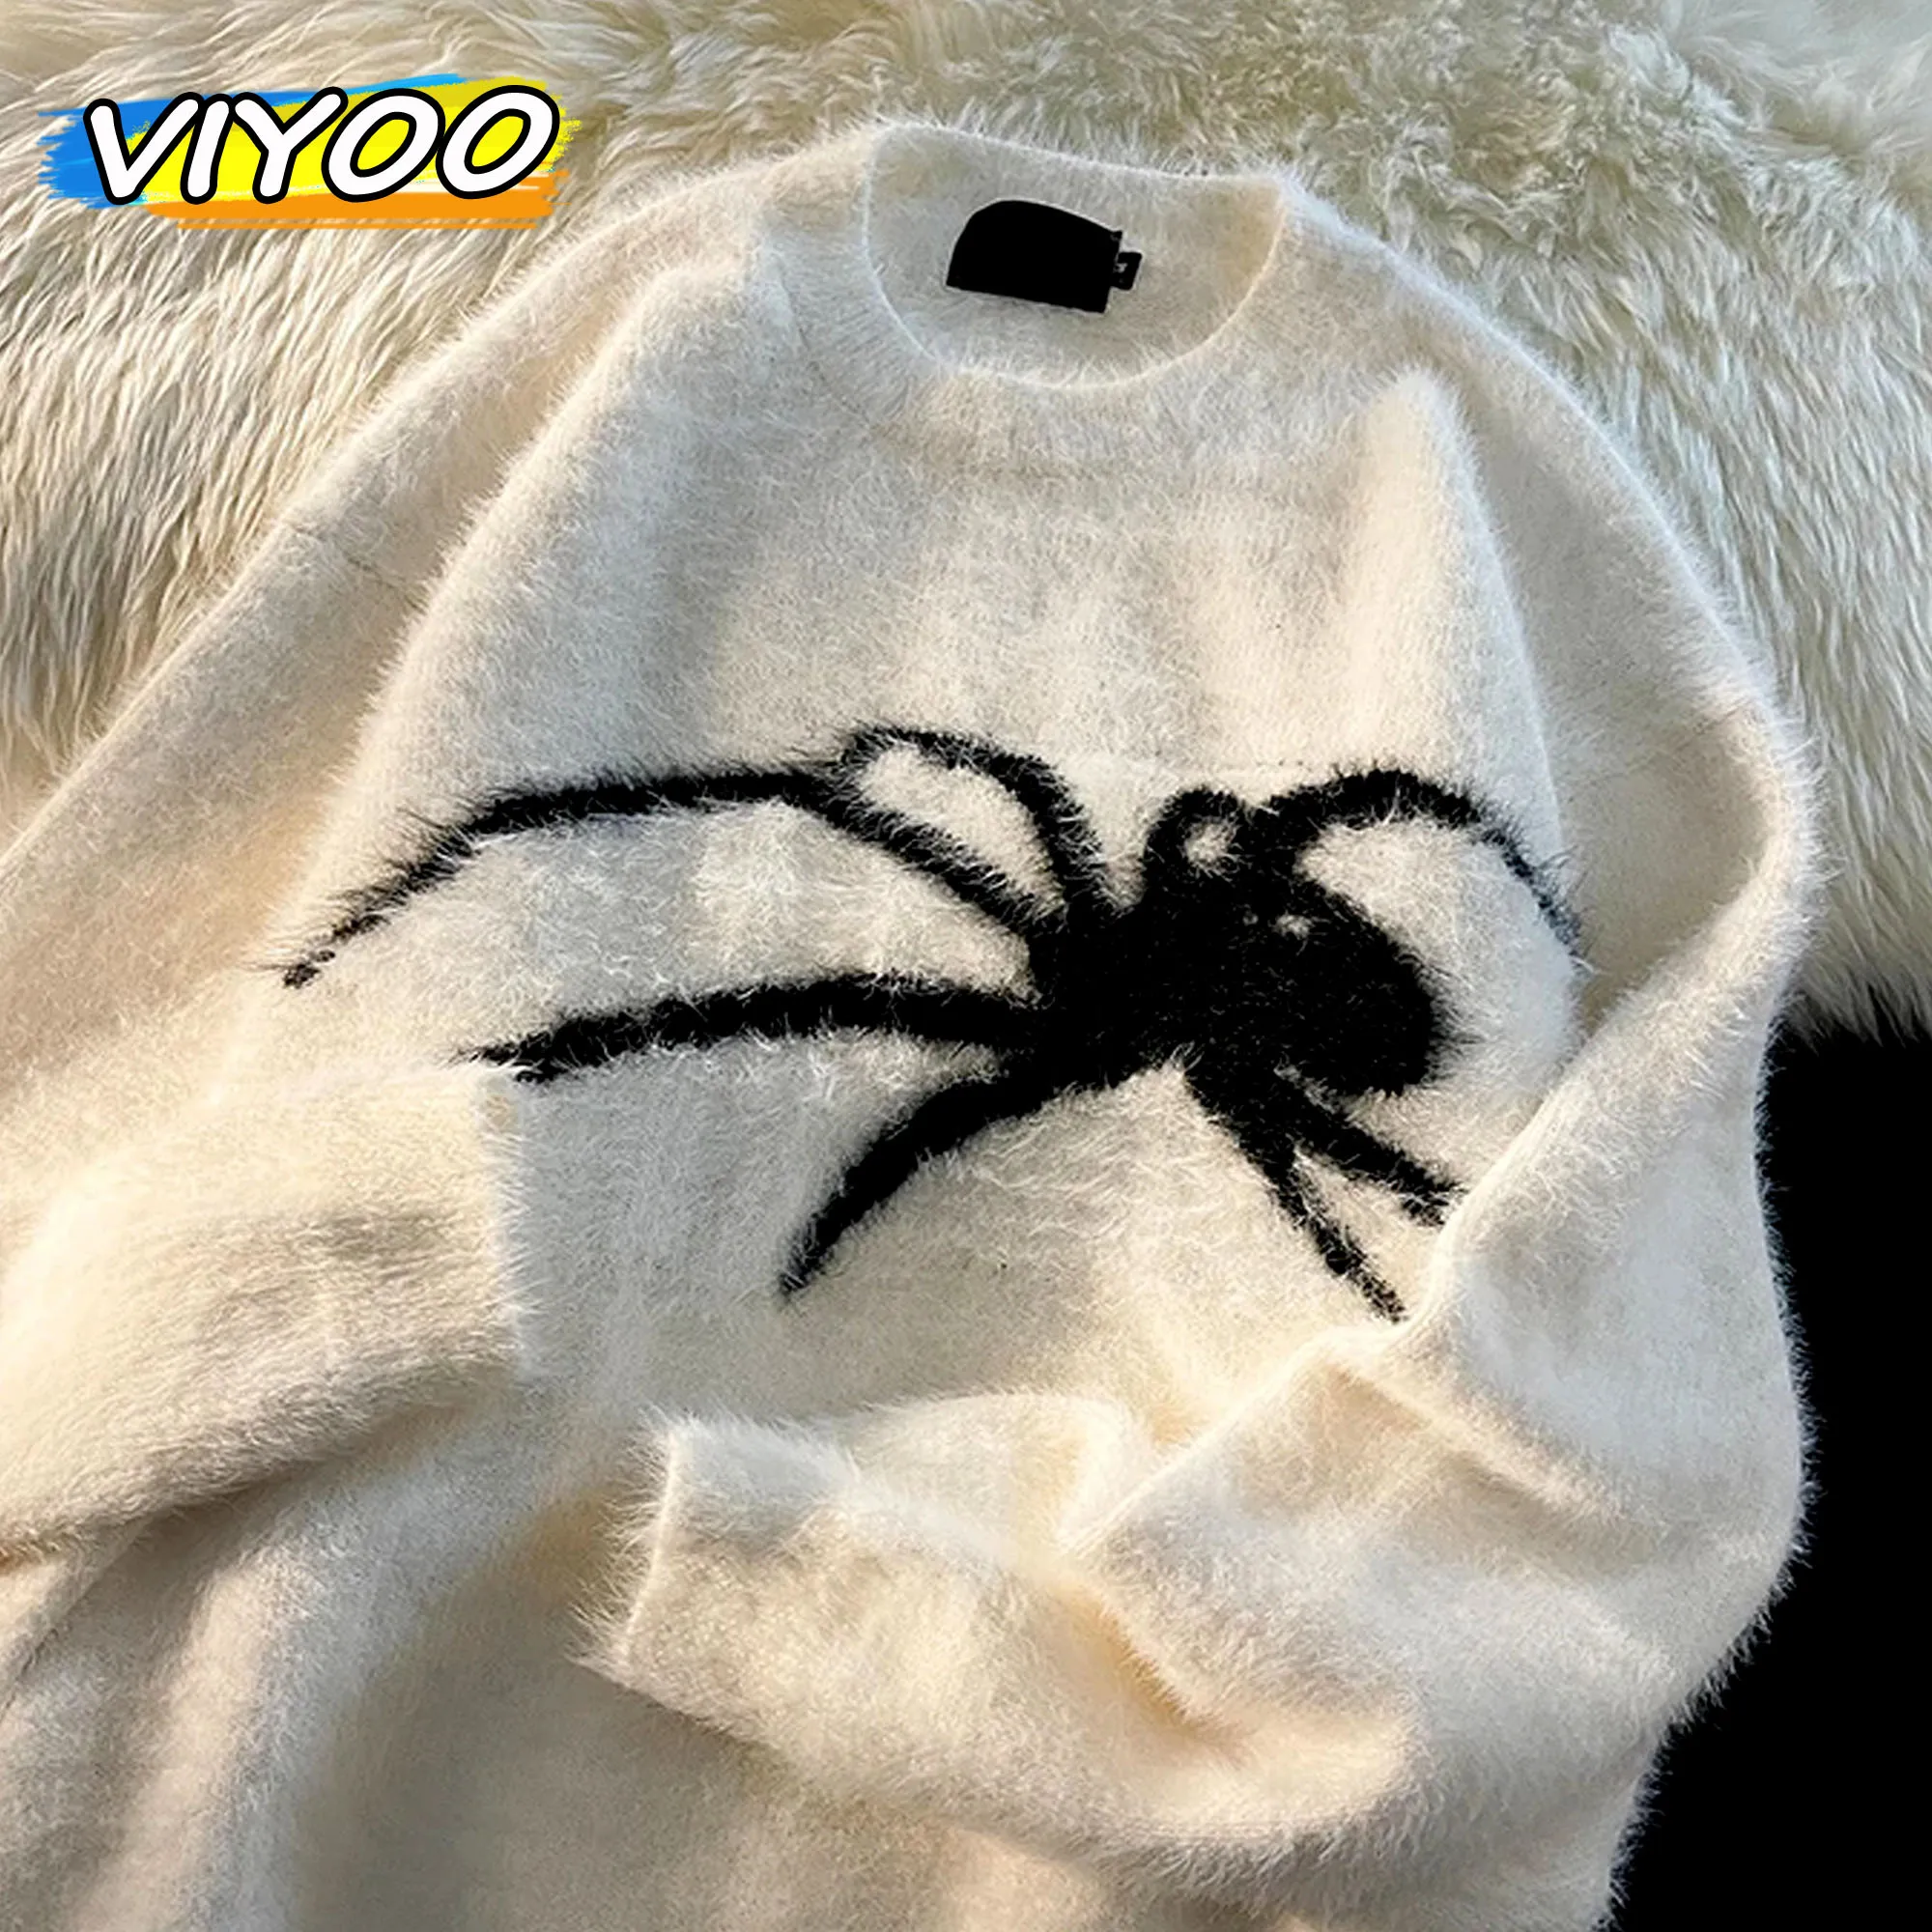 

Spider Sweater for Women Pull Knitwear Vintage Jumper Korean Winter Clothes Knit Sweater Casual Oversized Y2k Pullovers For Men